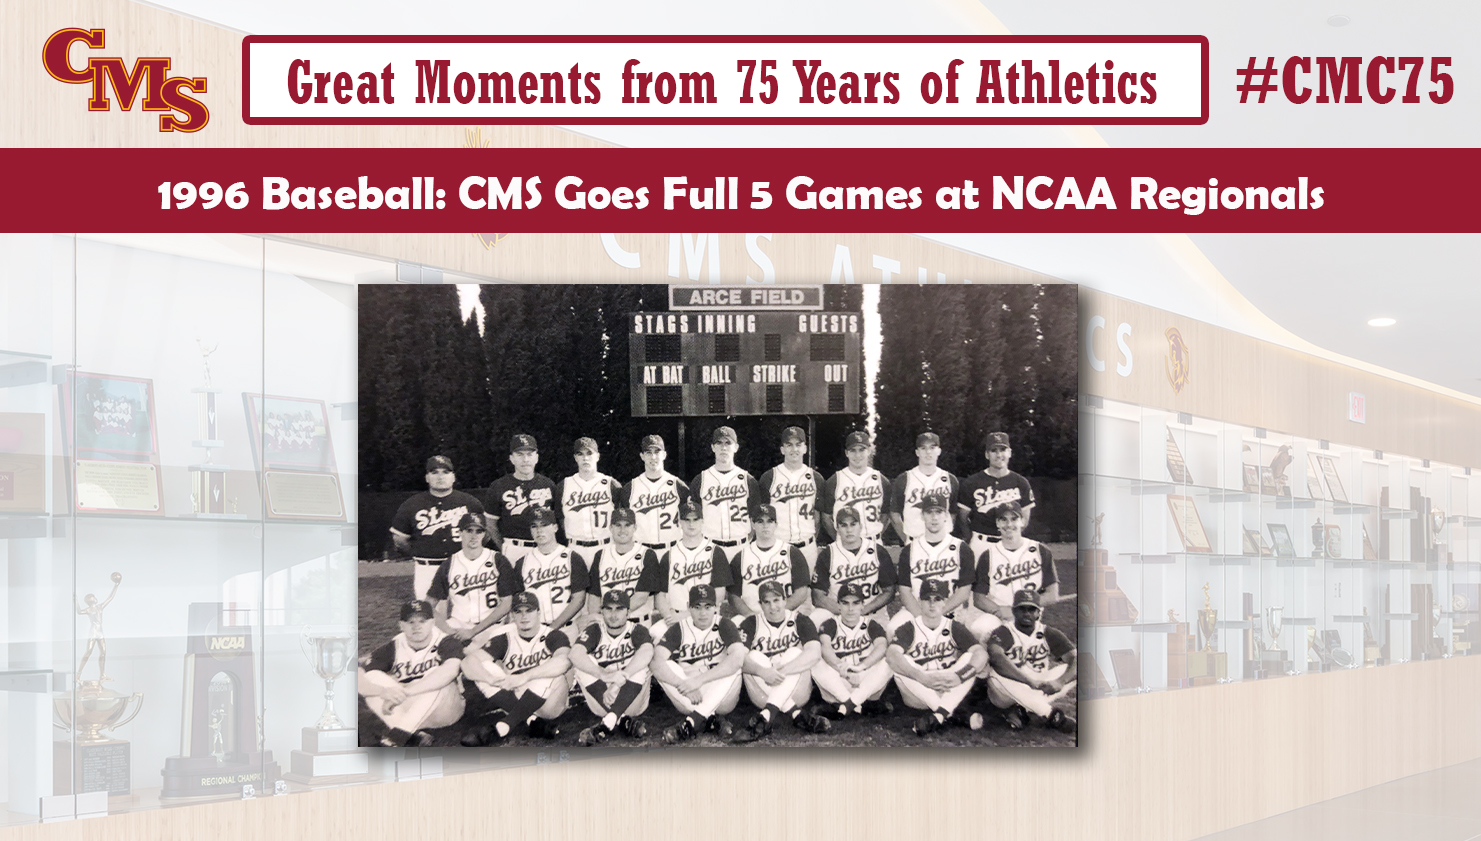 Team shot of the 1996 Baseball team. Words over the photo read: Great Moments from 75 Years of Athletics. 1996 Baseball: CMS Goes Full 5 Games at NCAA Regionals